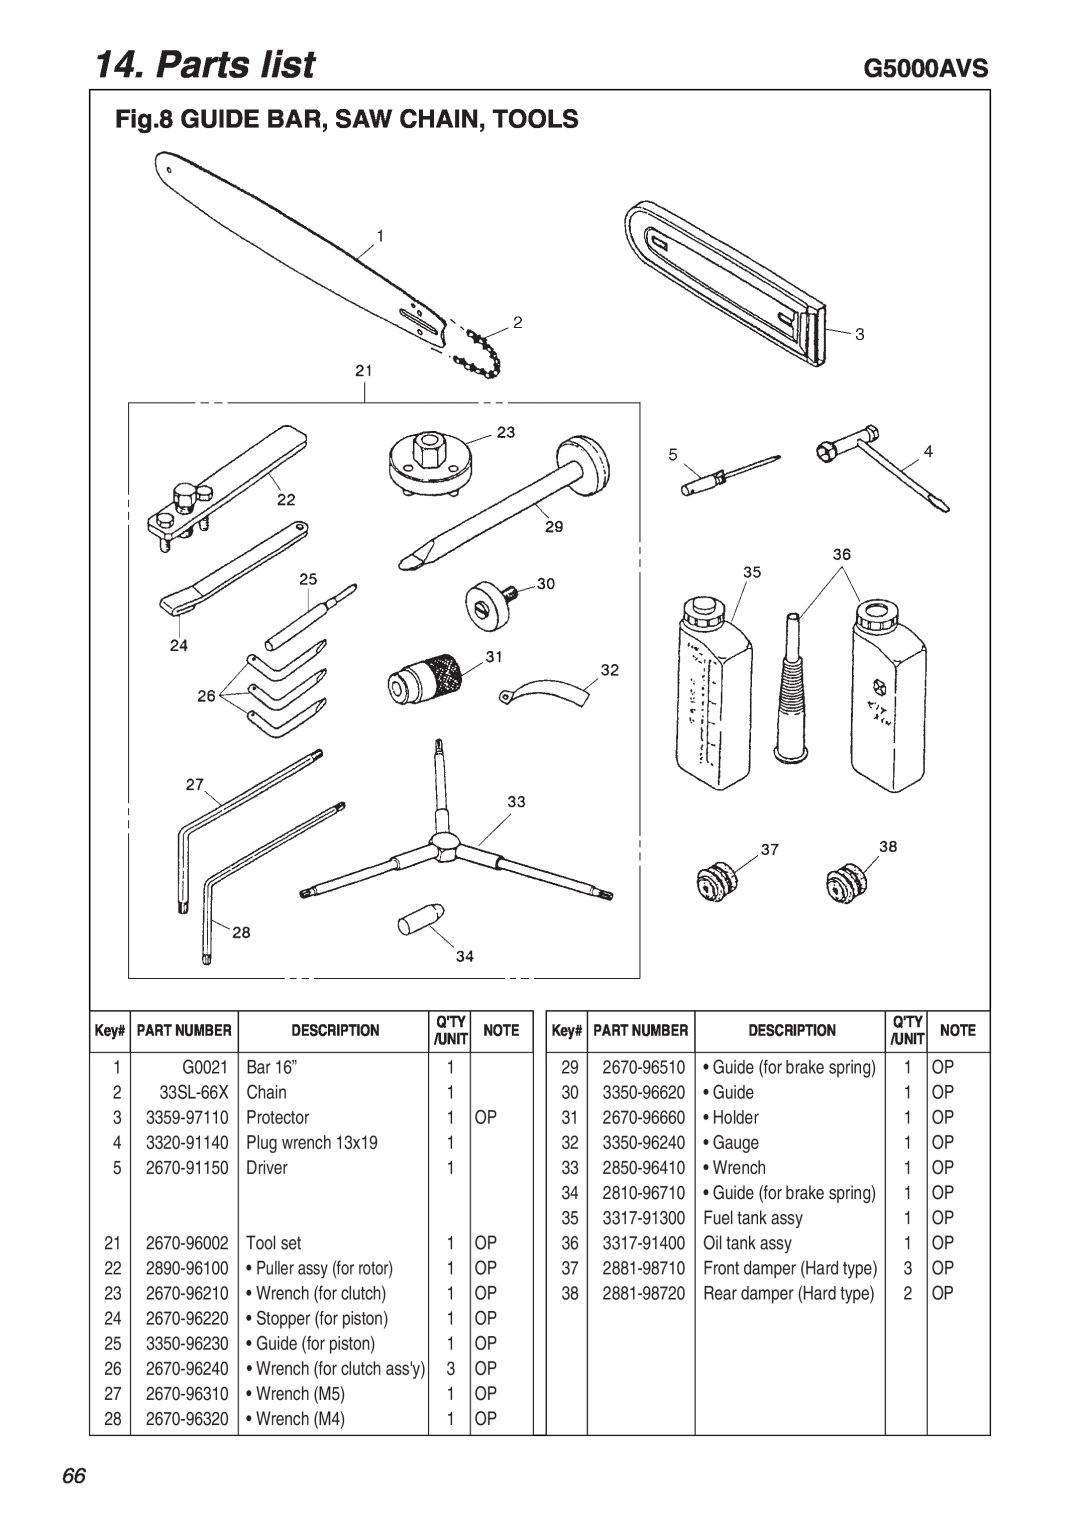 RedMax G5000AVS manual Guide Bar, Saw Chain, Tools, Parts list, 3359-97110 